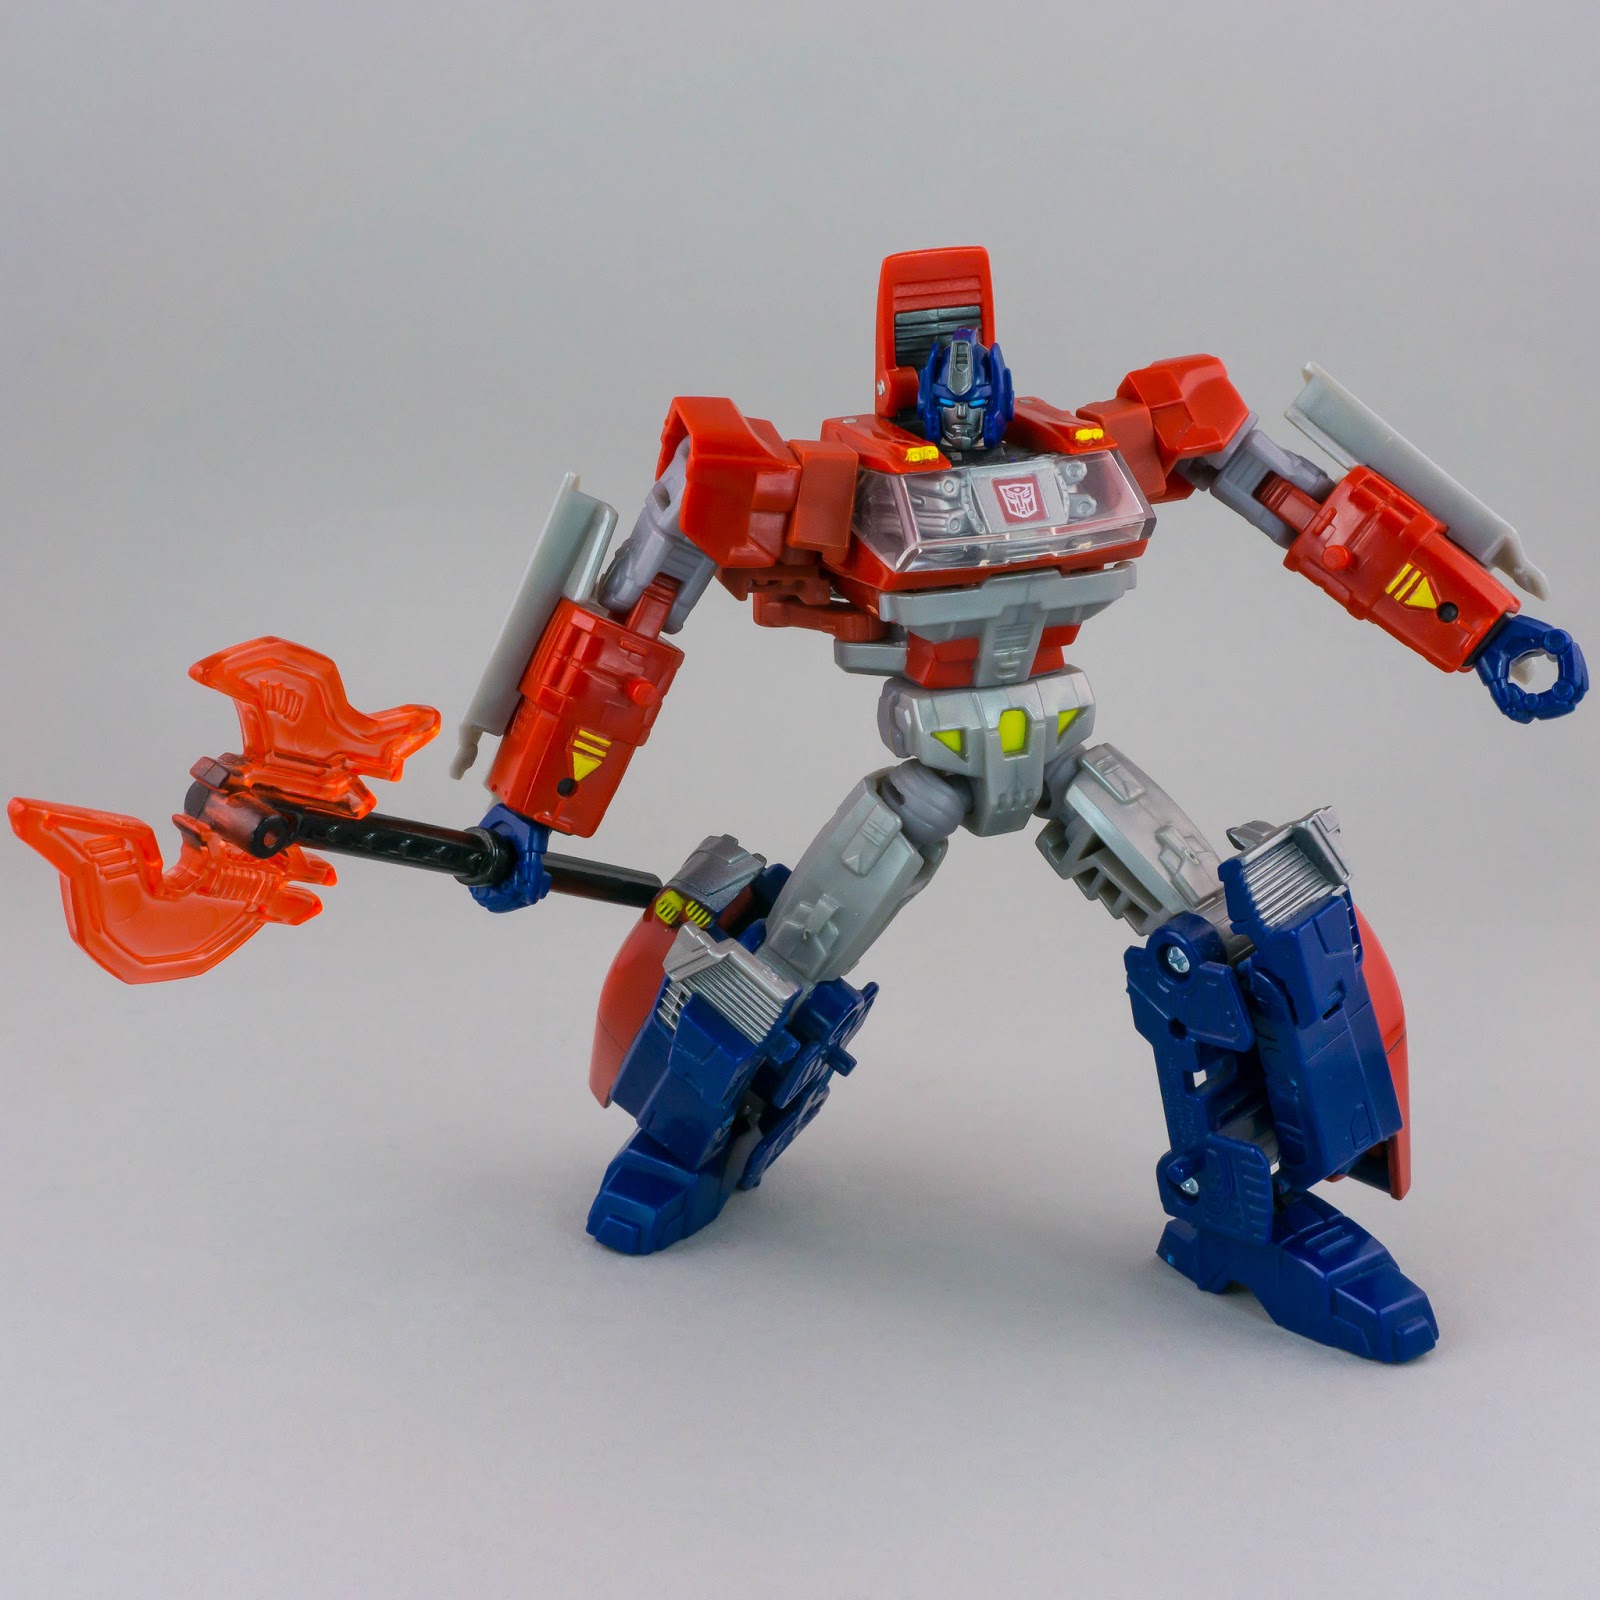 Transformers Generations Orion Pax robot mode posed with axe alternate pose